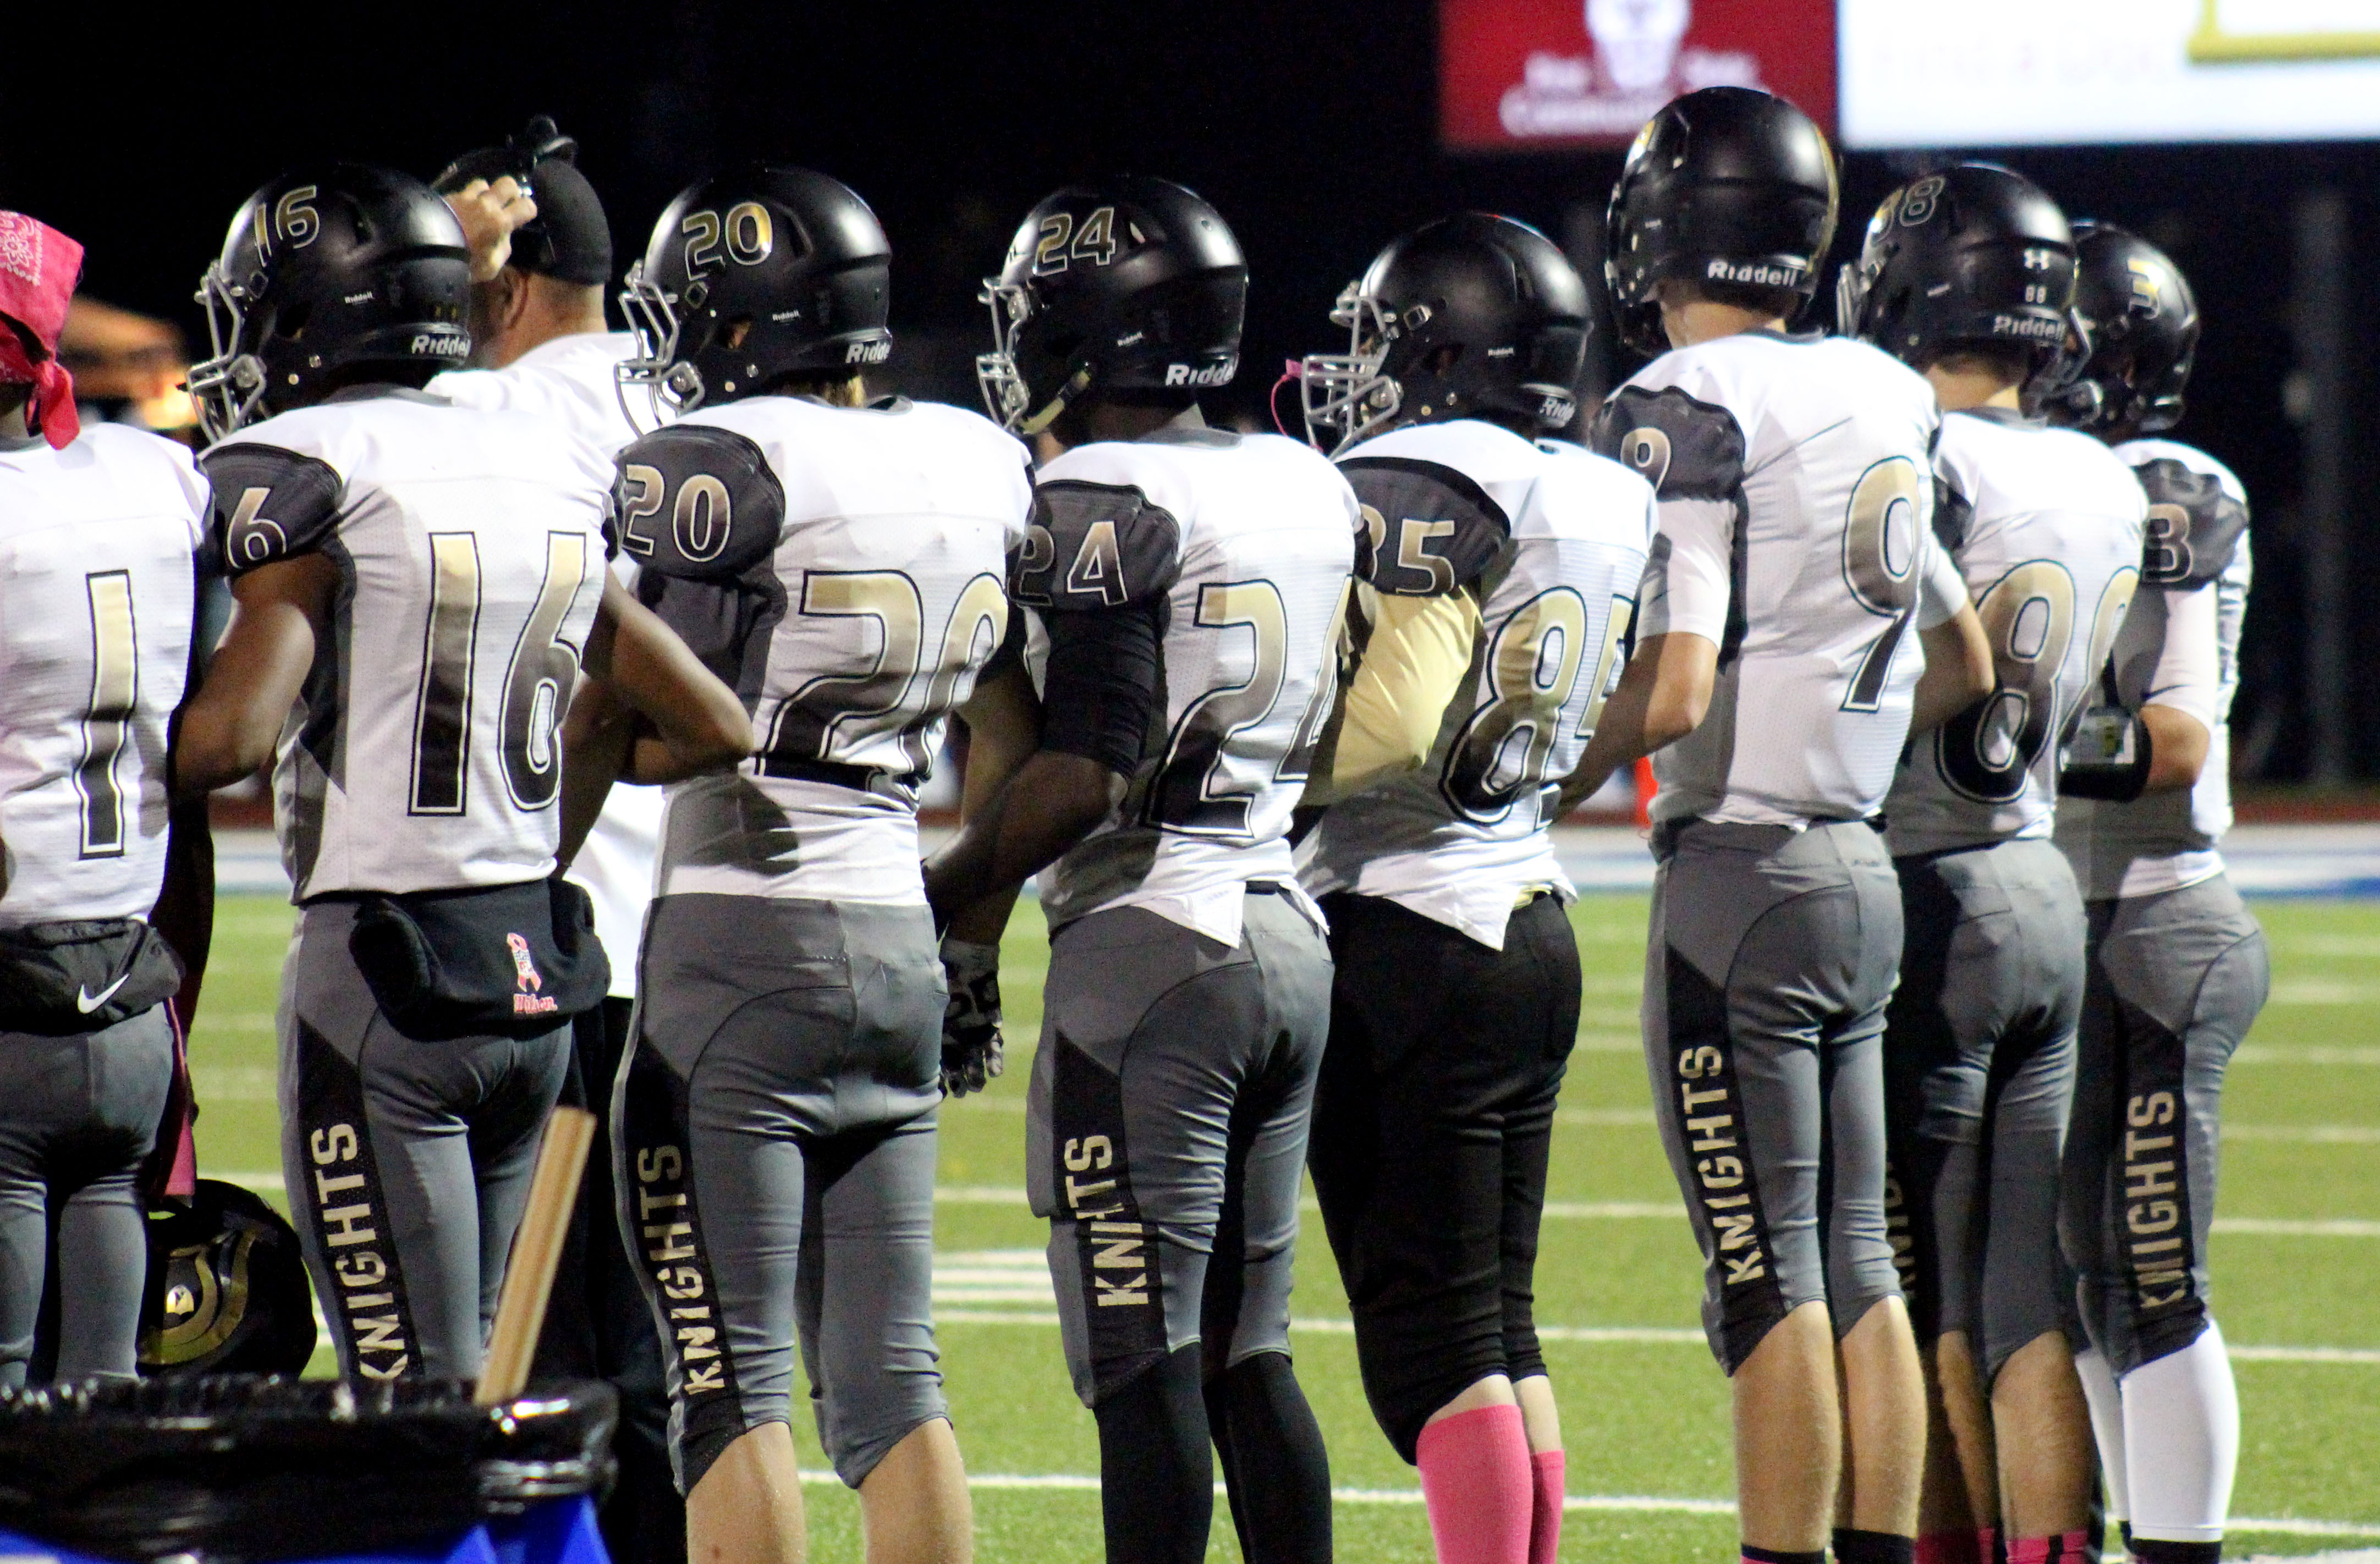 Players link arms before the game against WHS as the coin is tossed (Michal Basford)